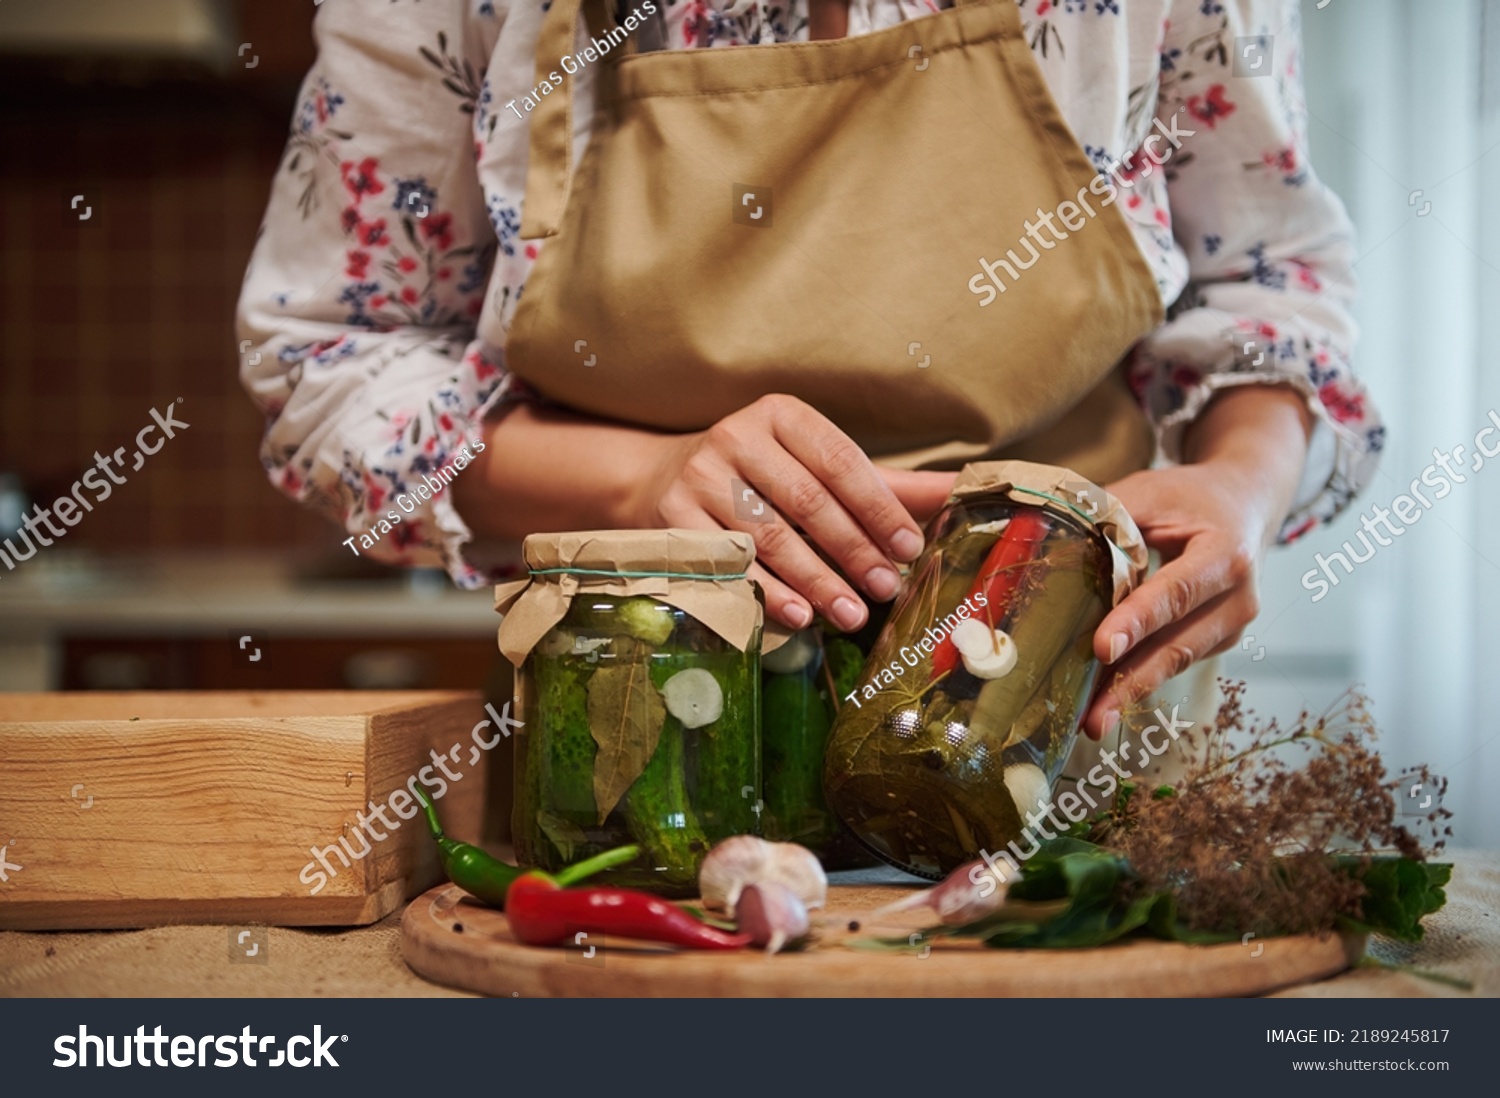 Close-up of homemade pickled canned cucumbers and chili peppers in sterilized glass jars in the hands of a young woman housewife. Fresh fragrant ingredients and culinary herbs on a kitchen table #2189245817